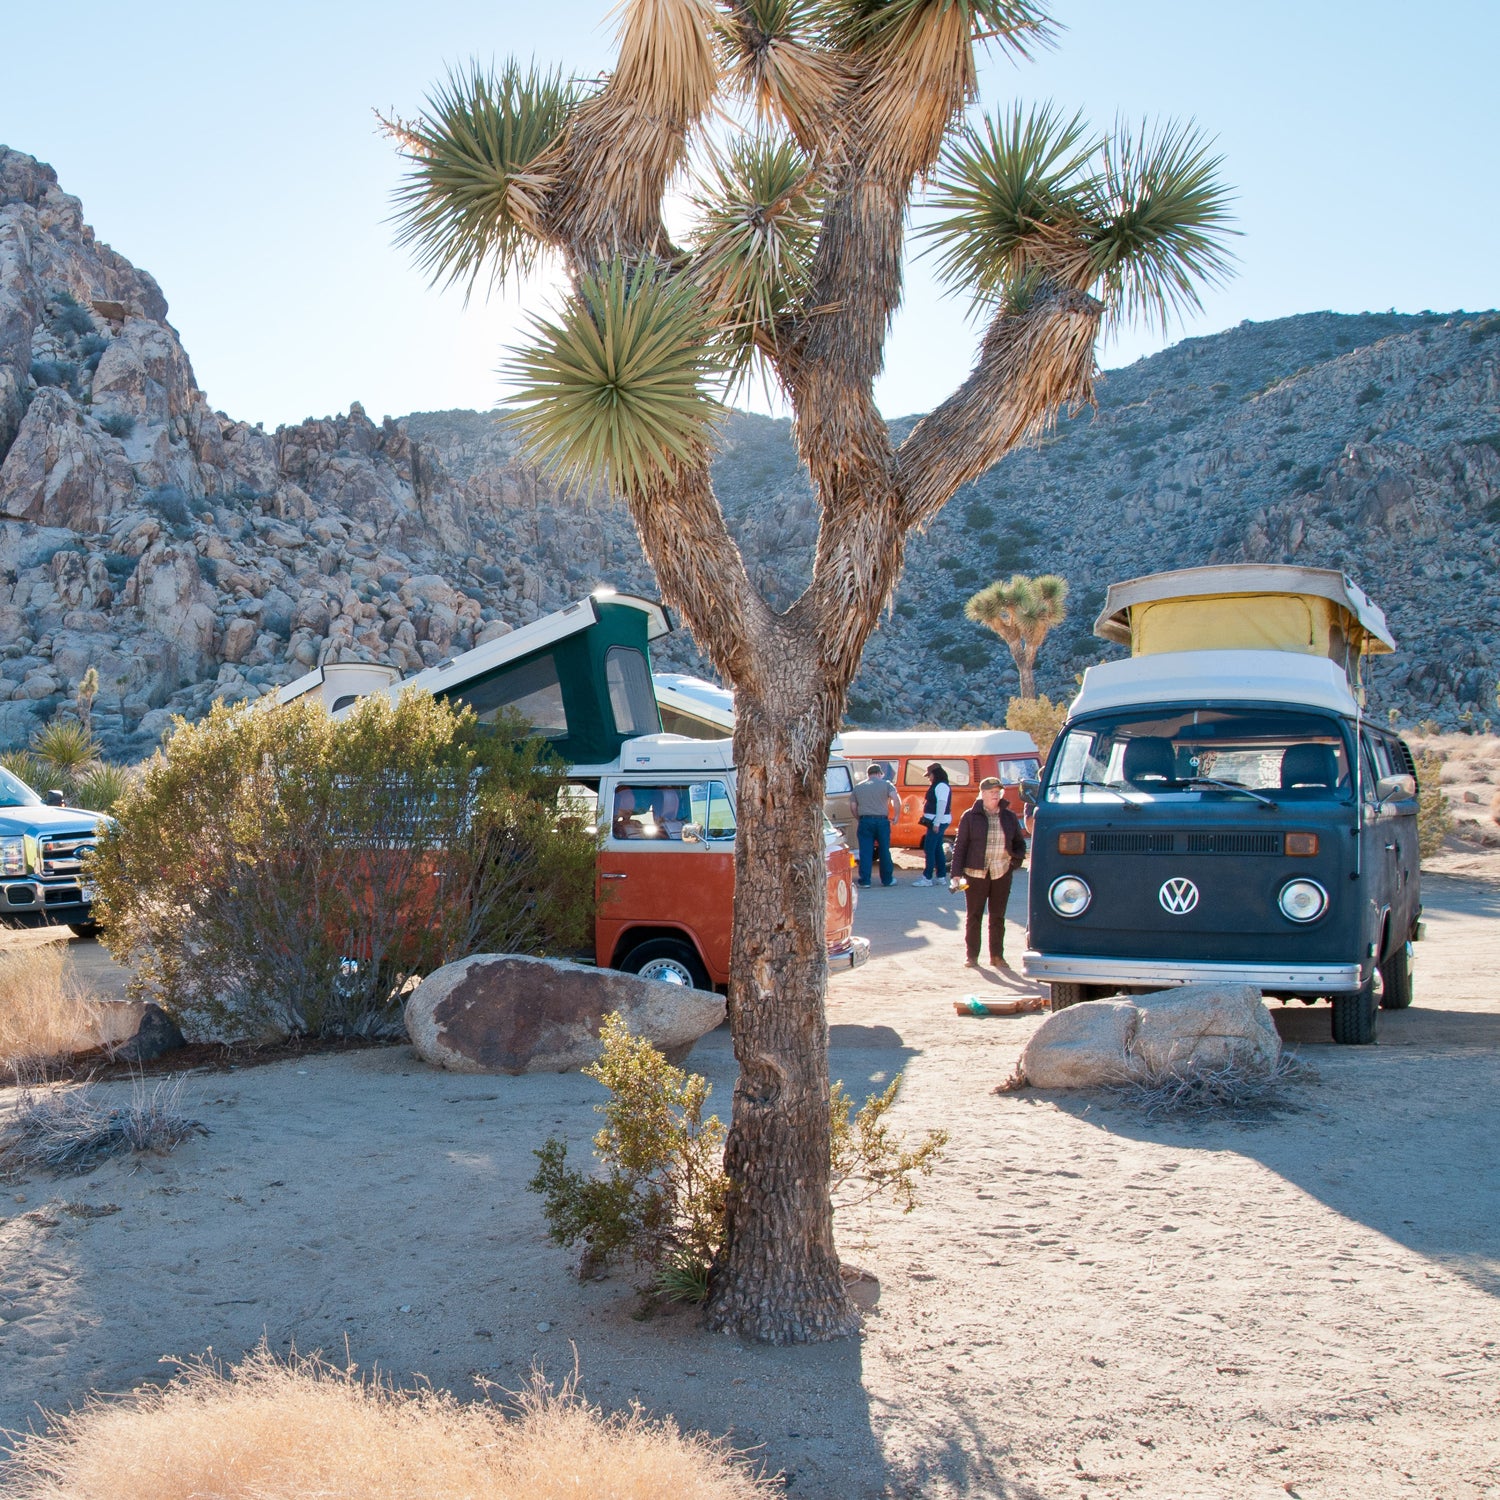 Where to Rent a Campervan for Your Next Road Trip